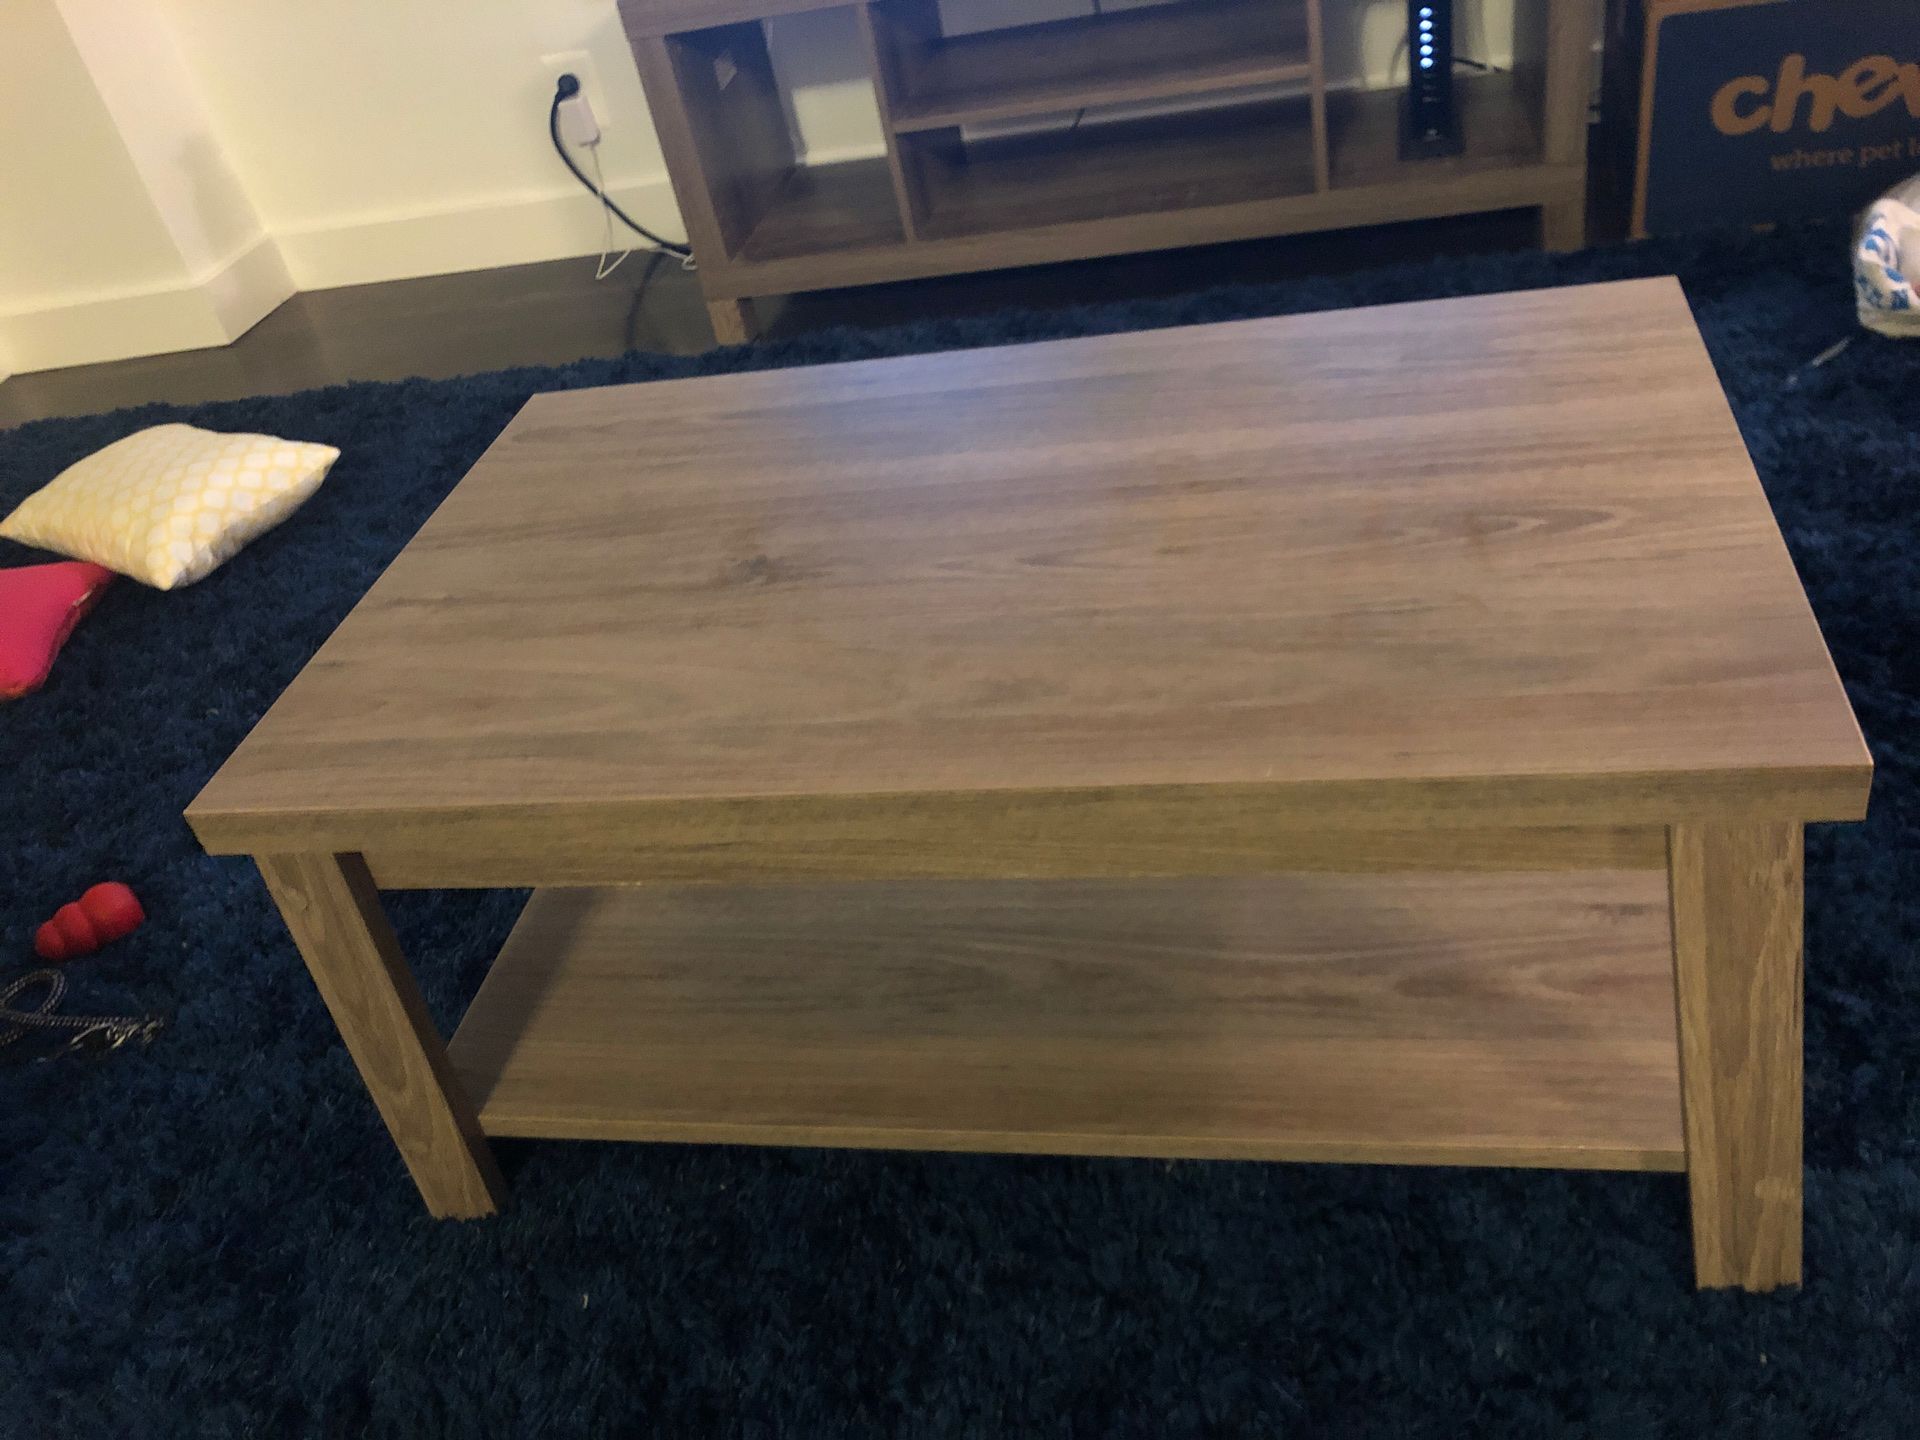 Matching coffee table and tv stand - selling together